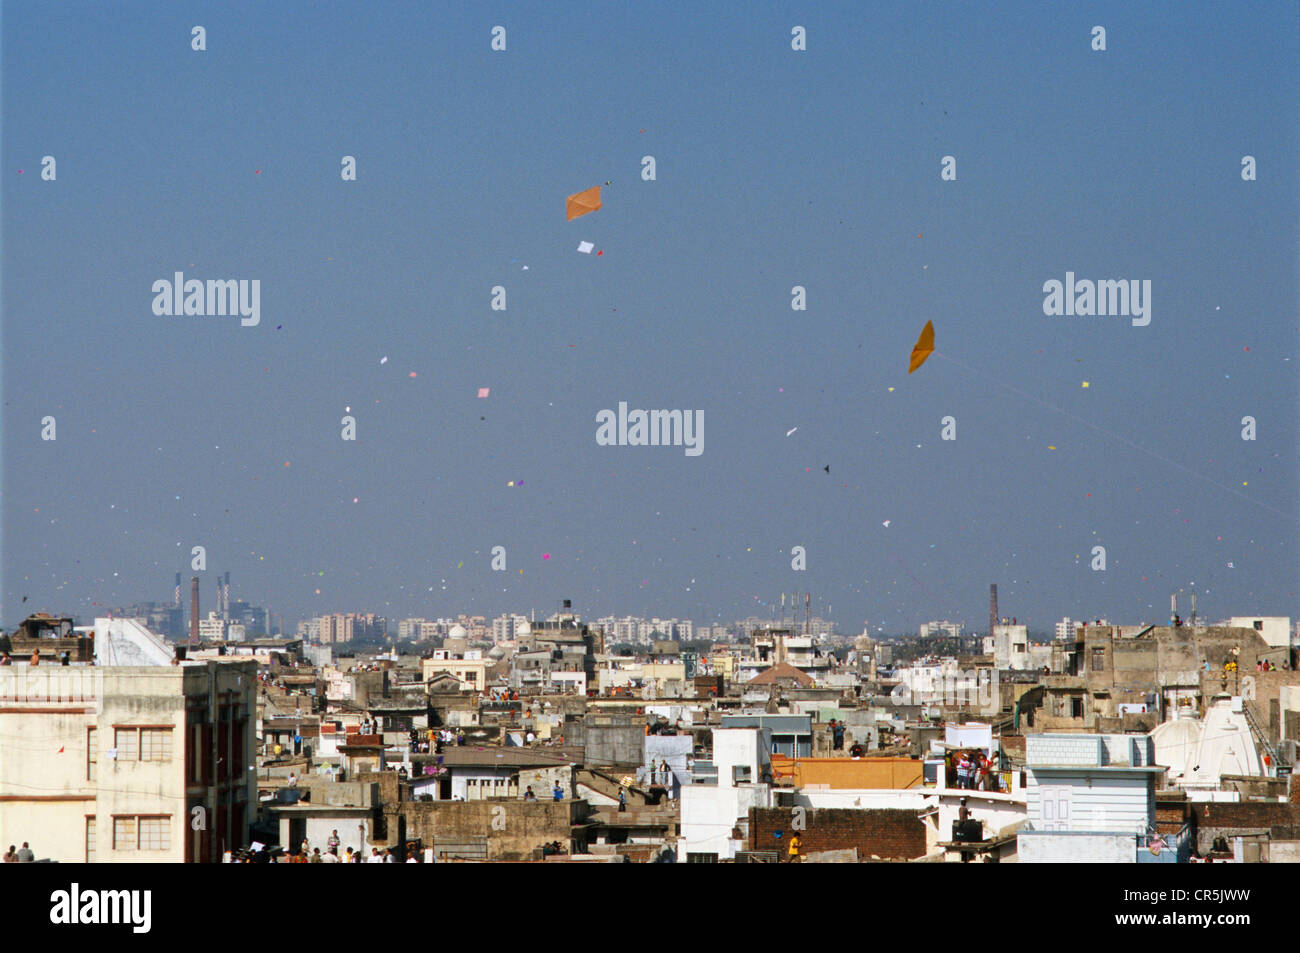 Every year at January, 14th the sky above Ahmedabad is completely full of kites, Ahmedabad, Gujarat, India, Asia Stock Photo